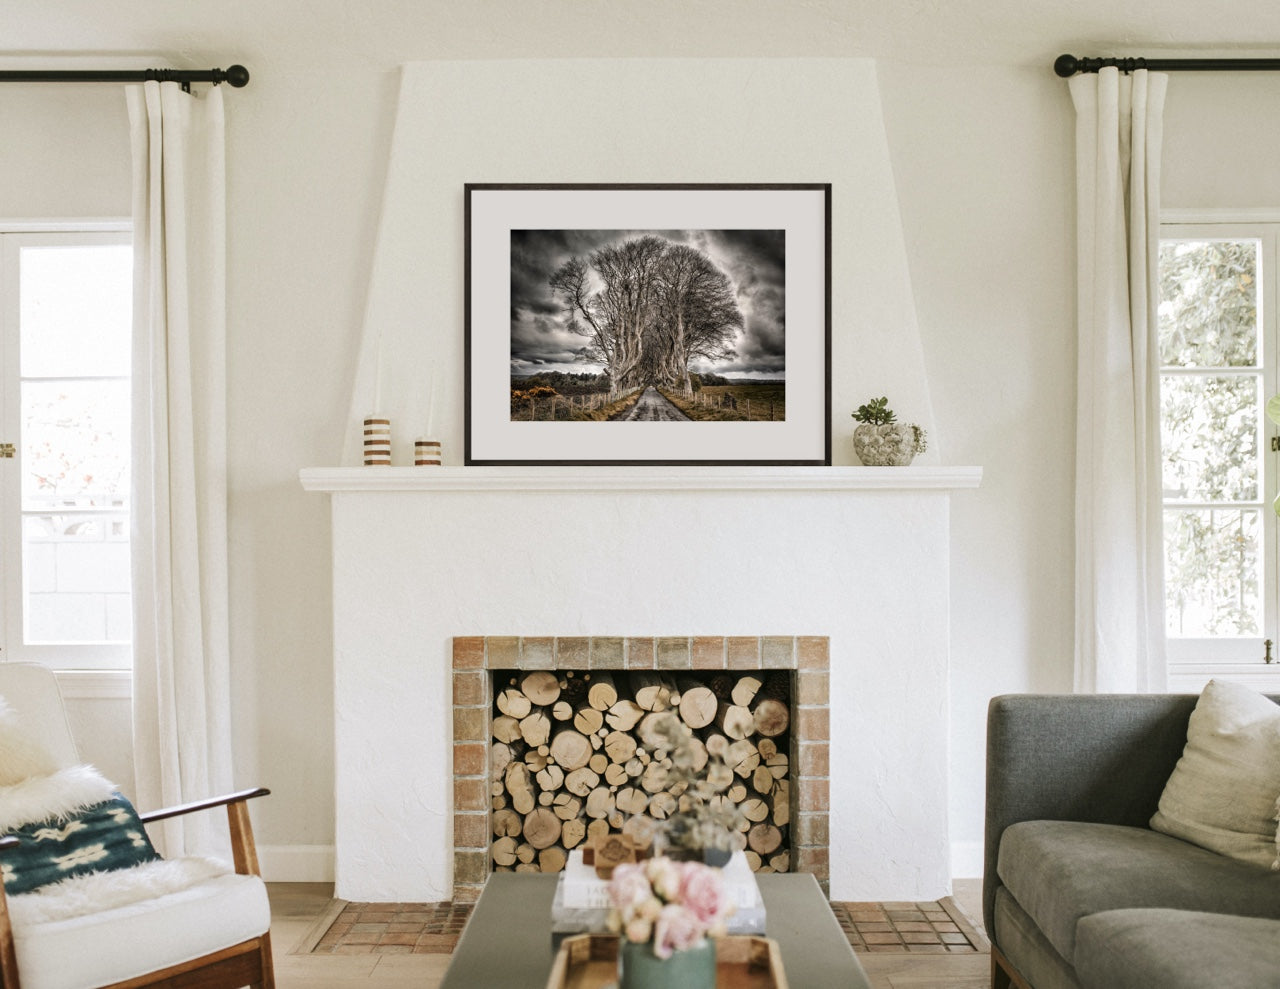 Fireplace mantel with framed black and white tree art